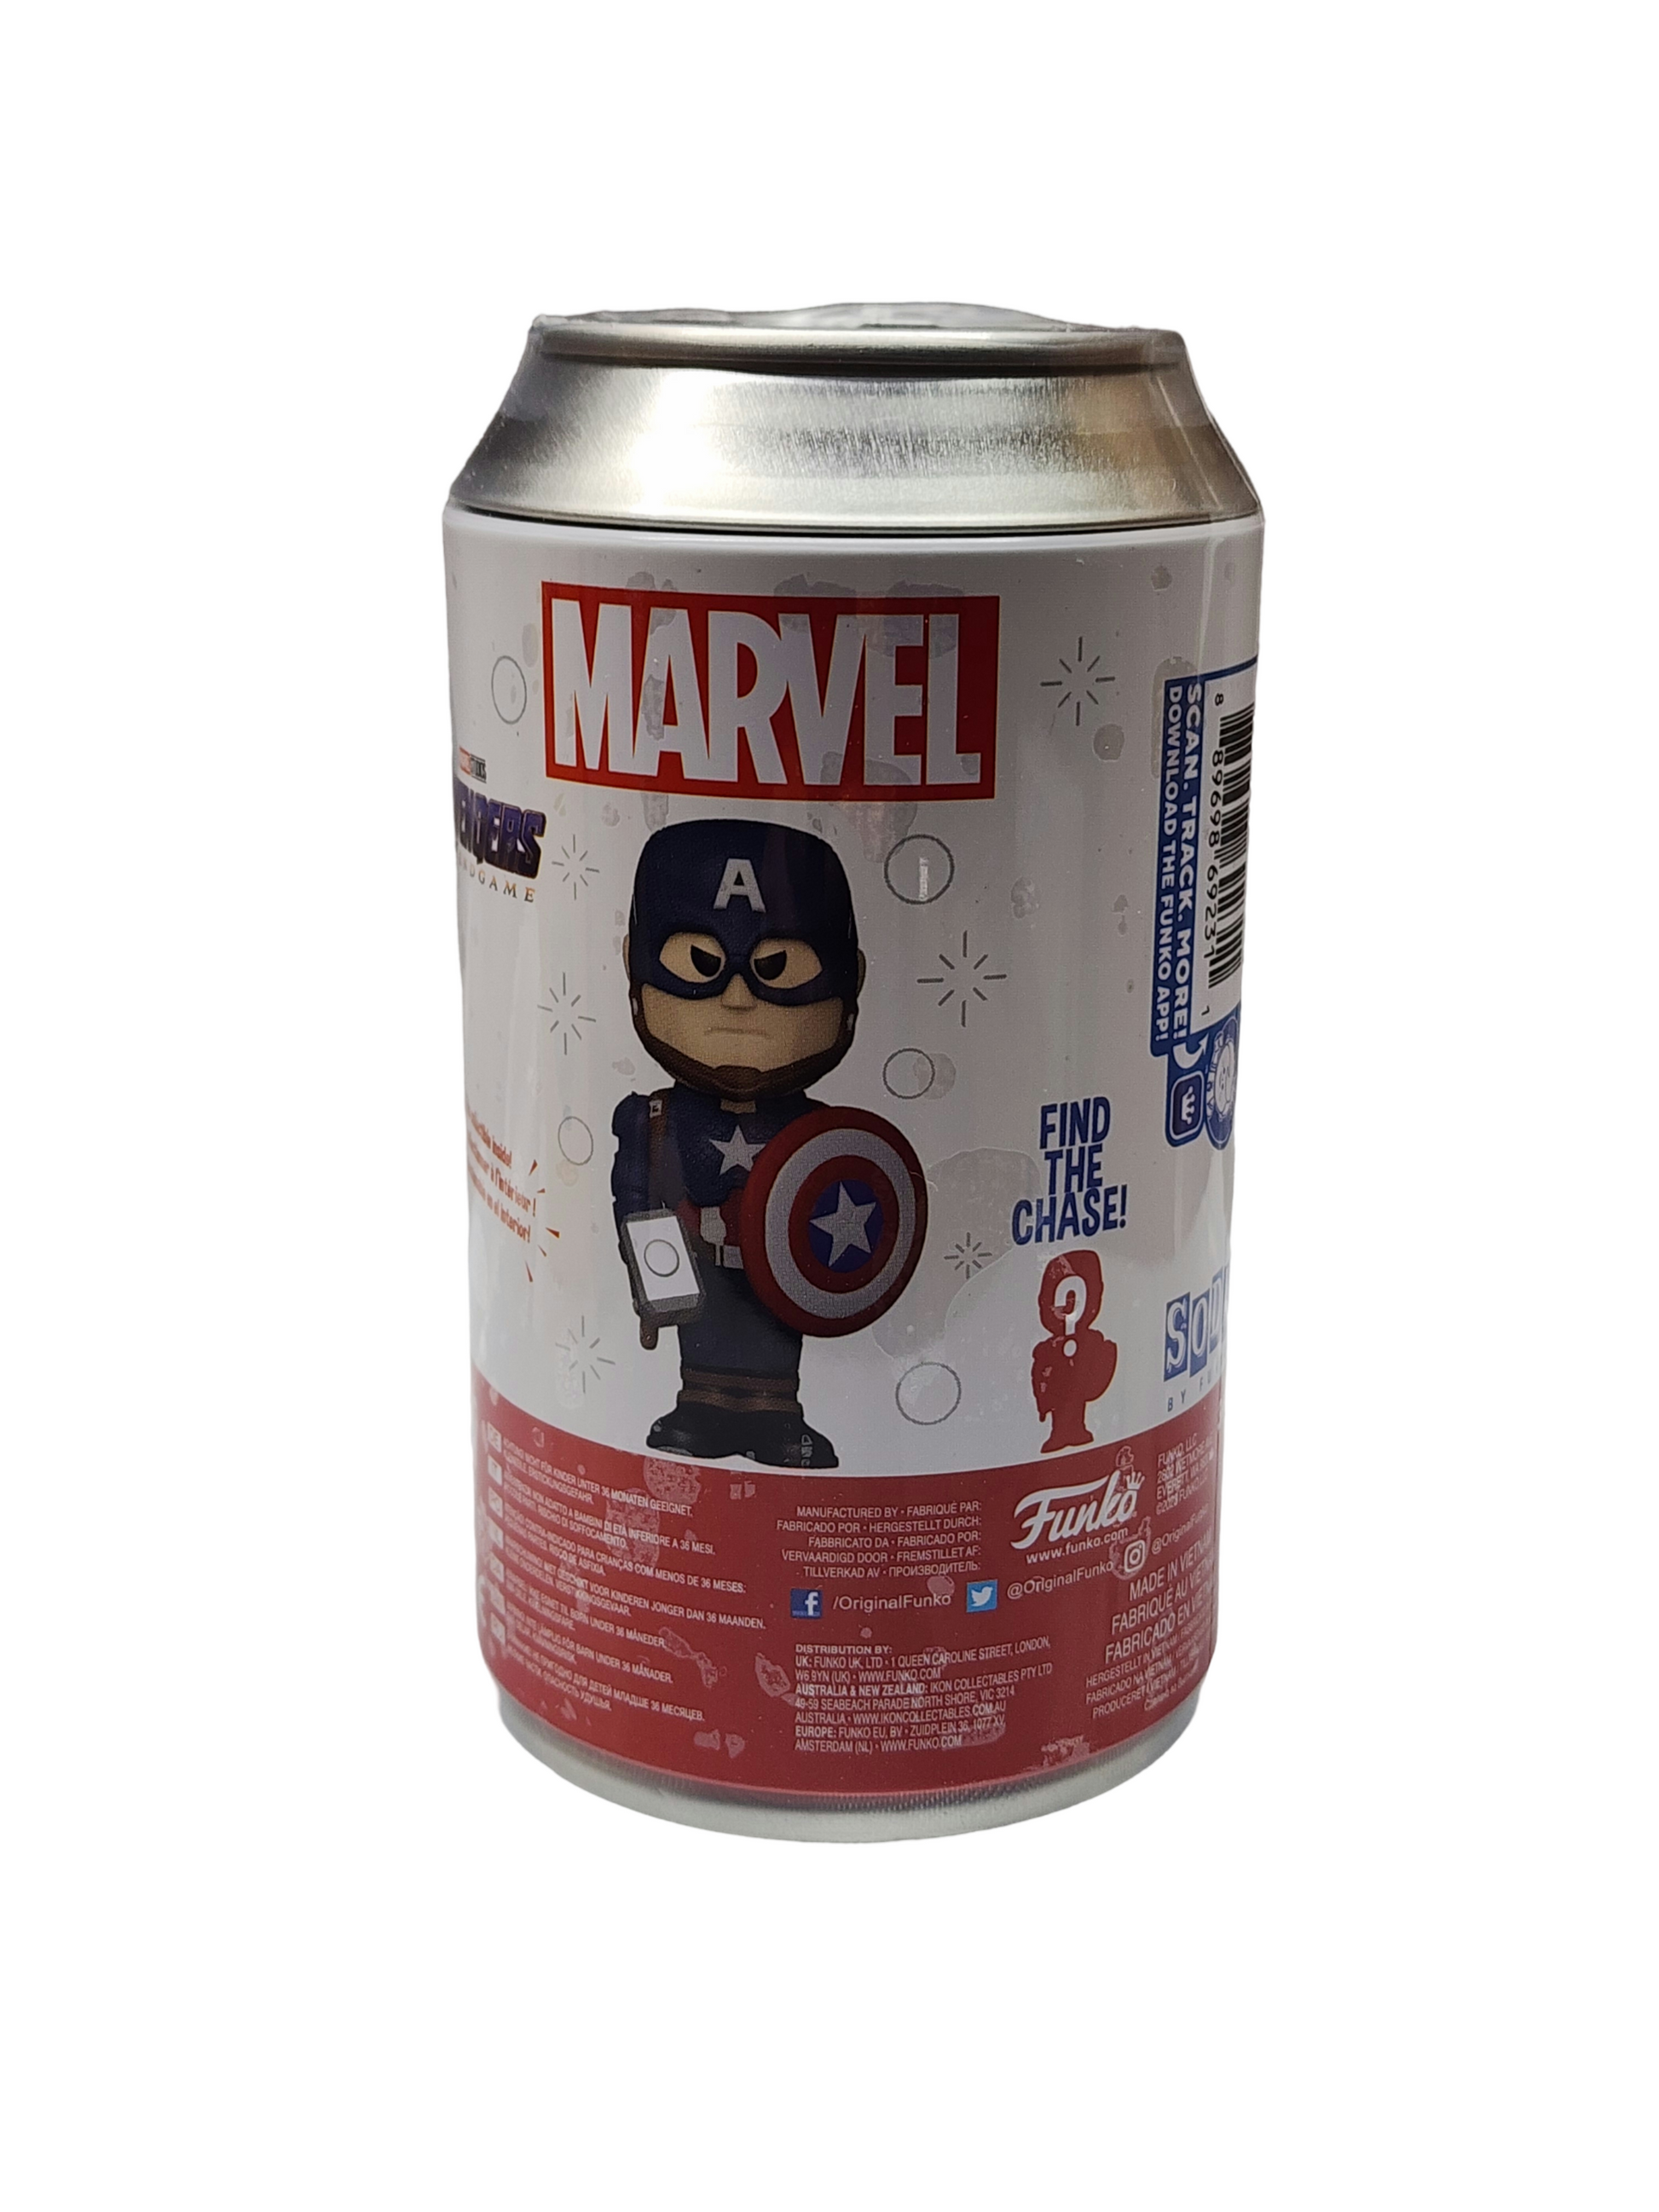 Captain America Vinyl Soda Figure - Entertainment Earth Exclusive! This heroic figure stands approximately 4 inches tall and comes packaged inside a collectible soda can, making it a must-have addition to any Marvel collection.